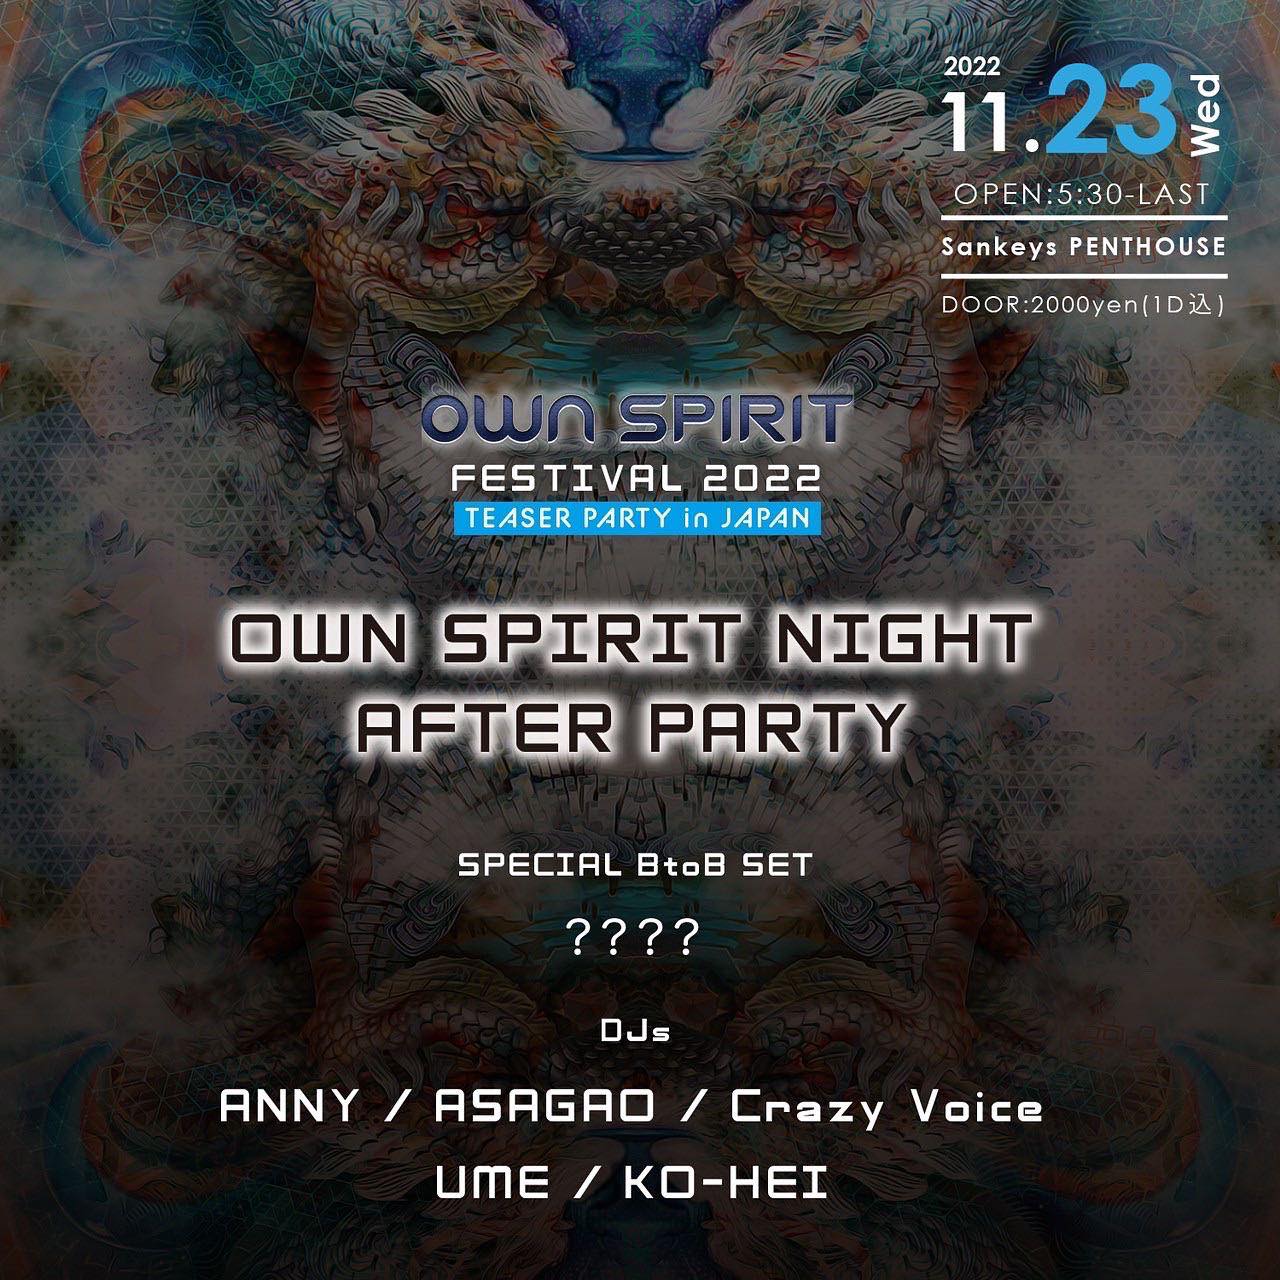 OWN SPIRIT NIGHT AFTER PARTY